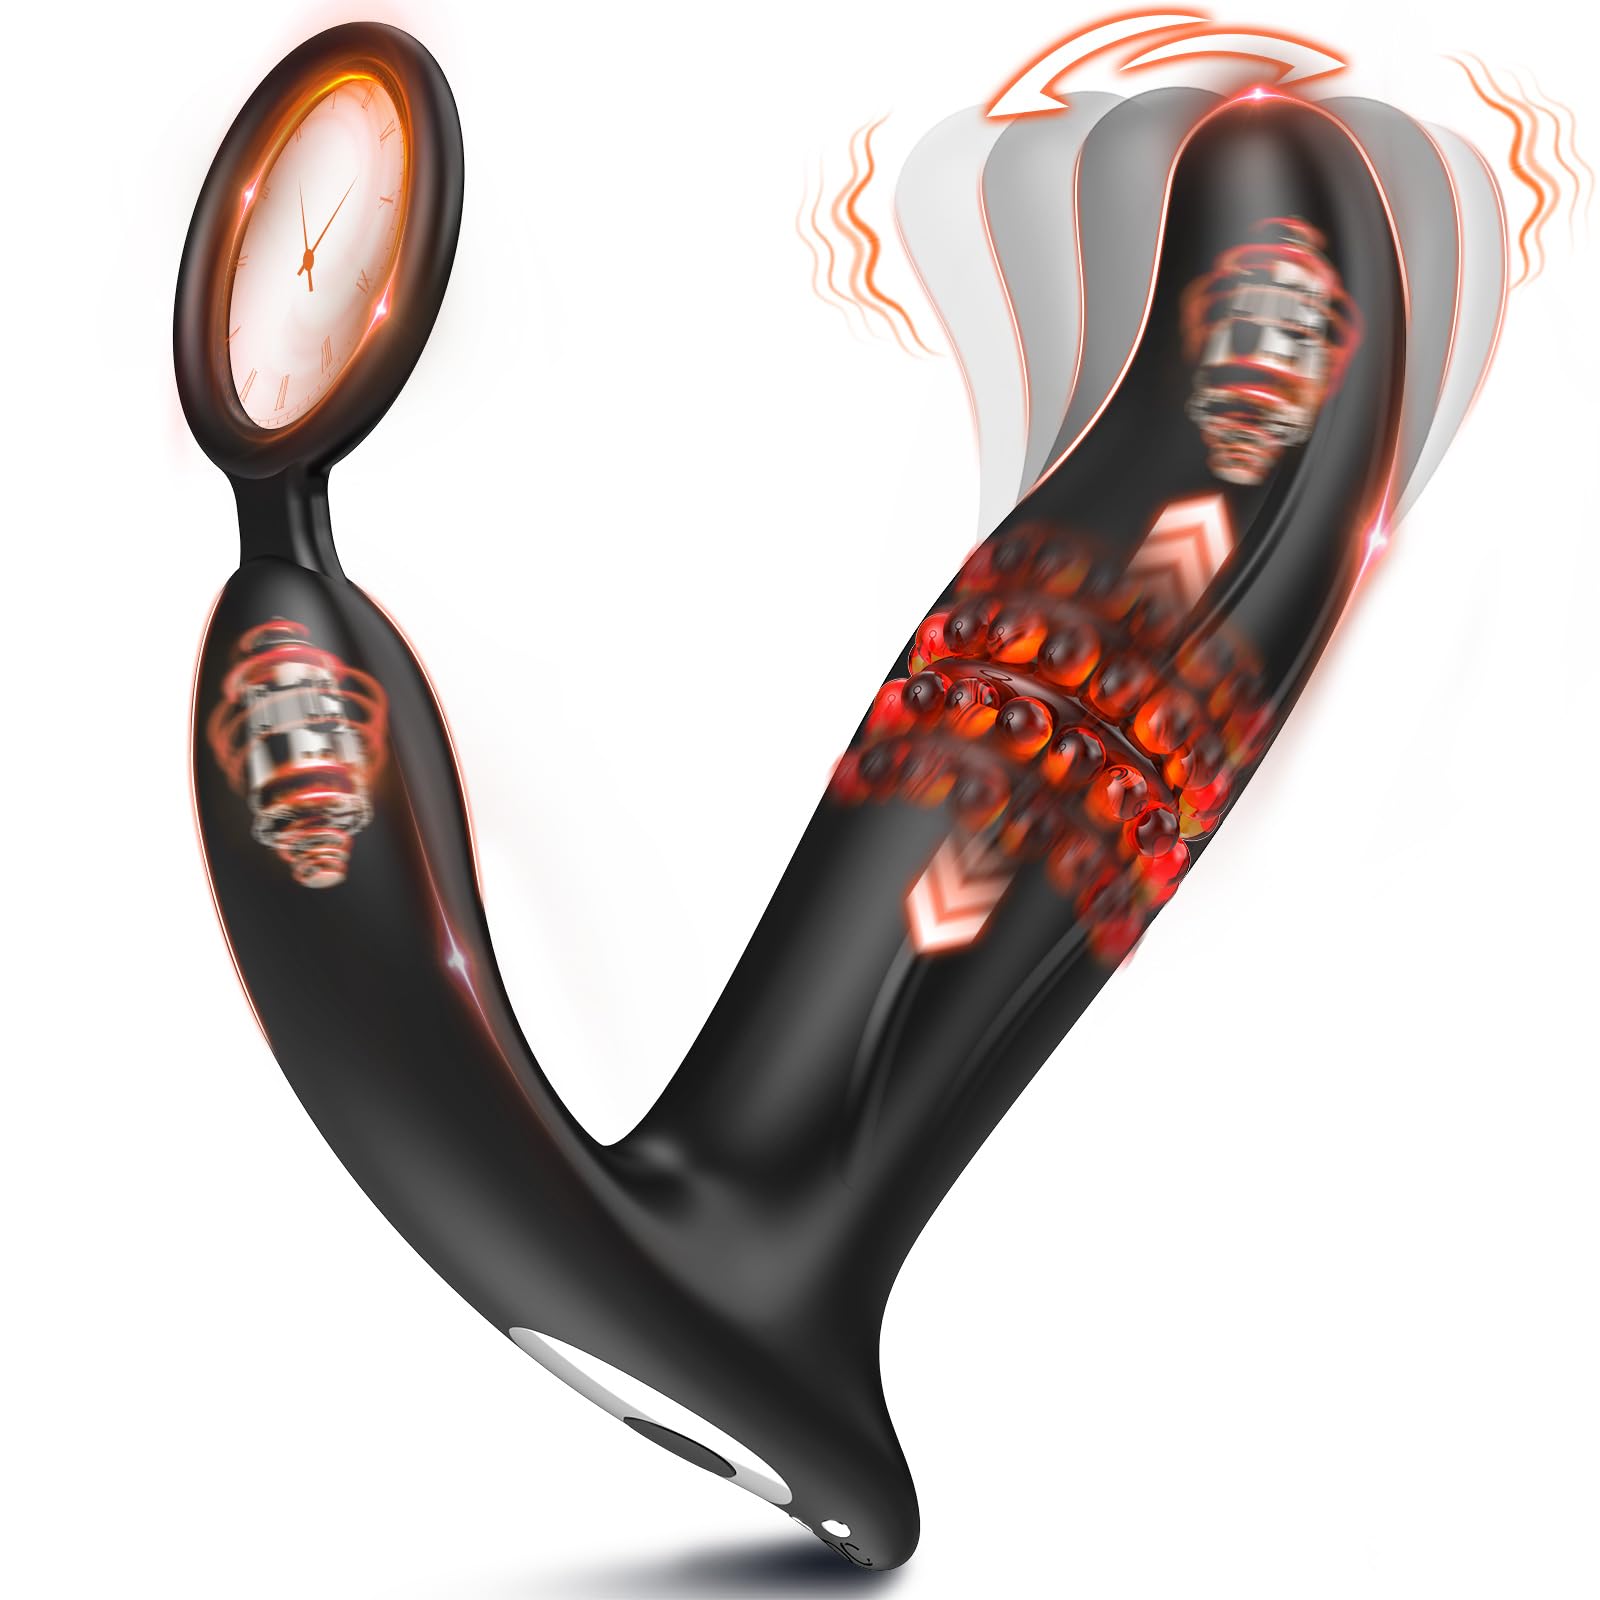 10 Wiggling Thrusting Modes Anal Plug Prostate Massager with Cock Ring